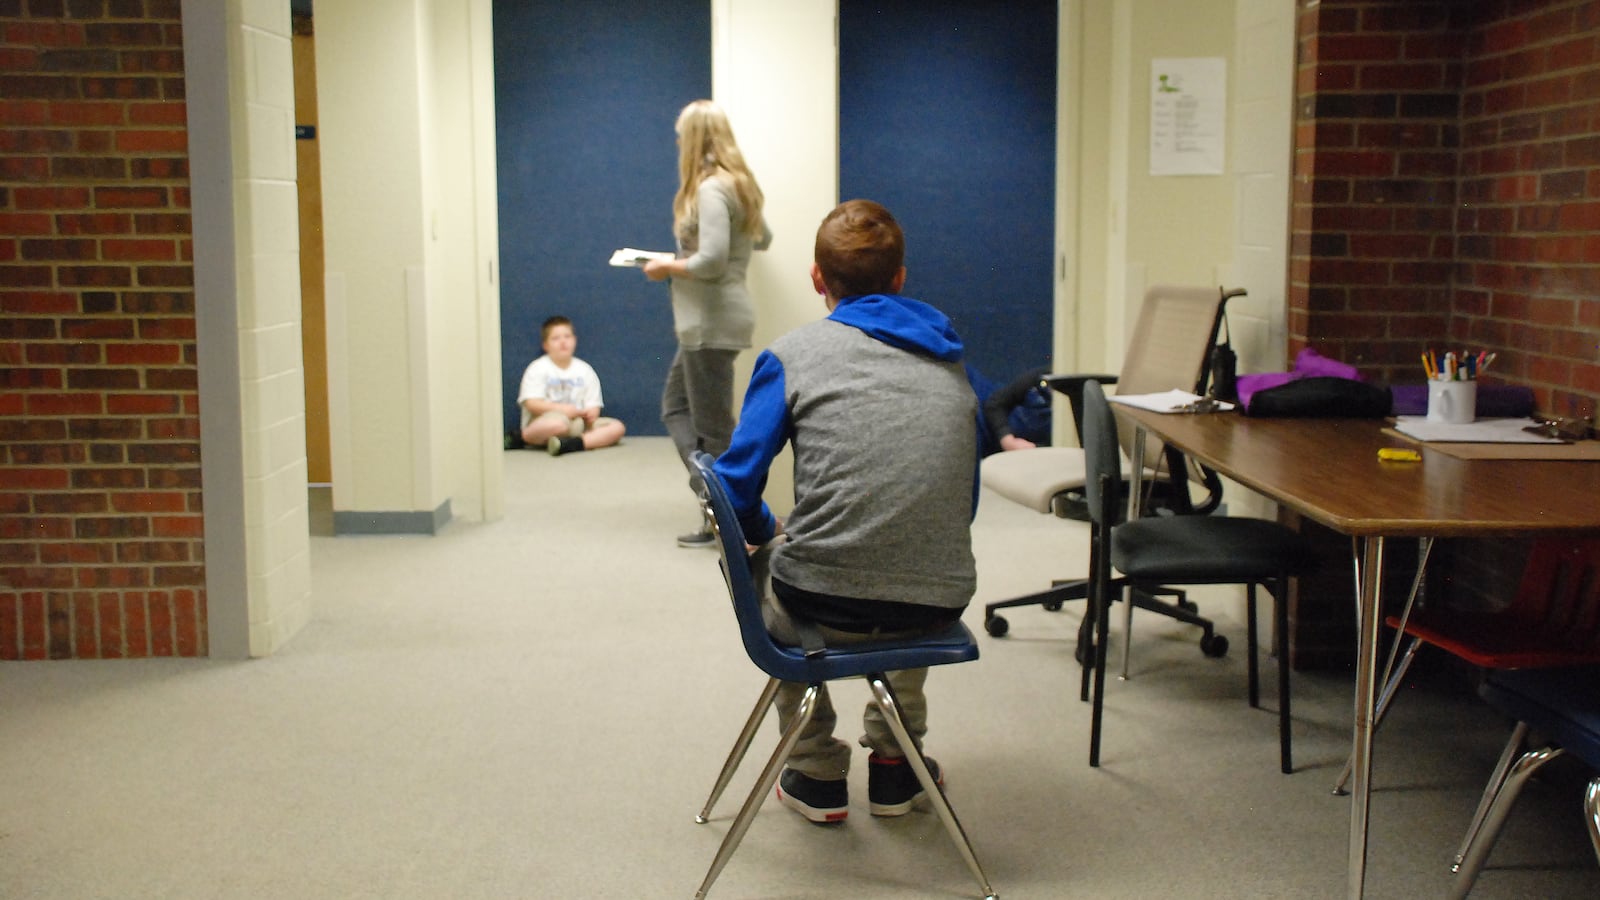 Students who need a break from class at the Sobesky Academy in Lakewood sit in "chill rooms" to refocus. On a recent morning, there were more students who wanted to use a chill room than the current campus allows, so one sat in the hall. School leaders hope a move to a larger facility will allow for more chill rooms.